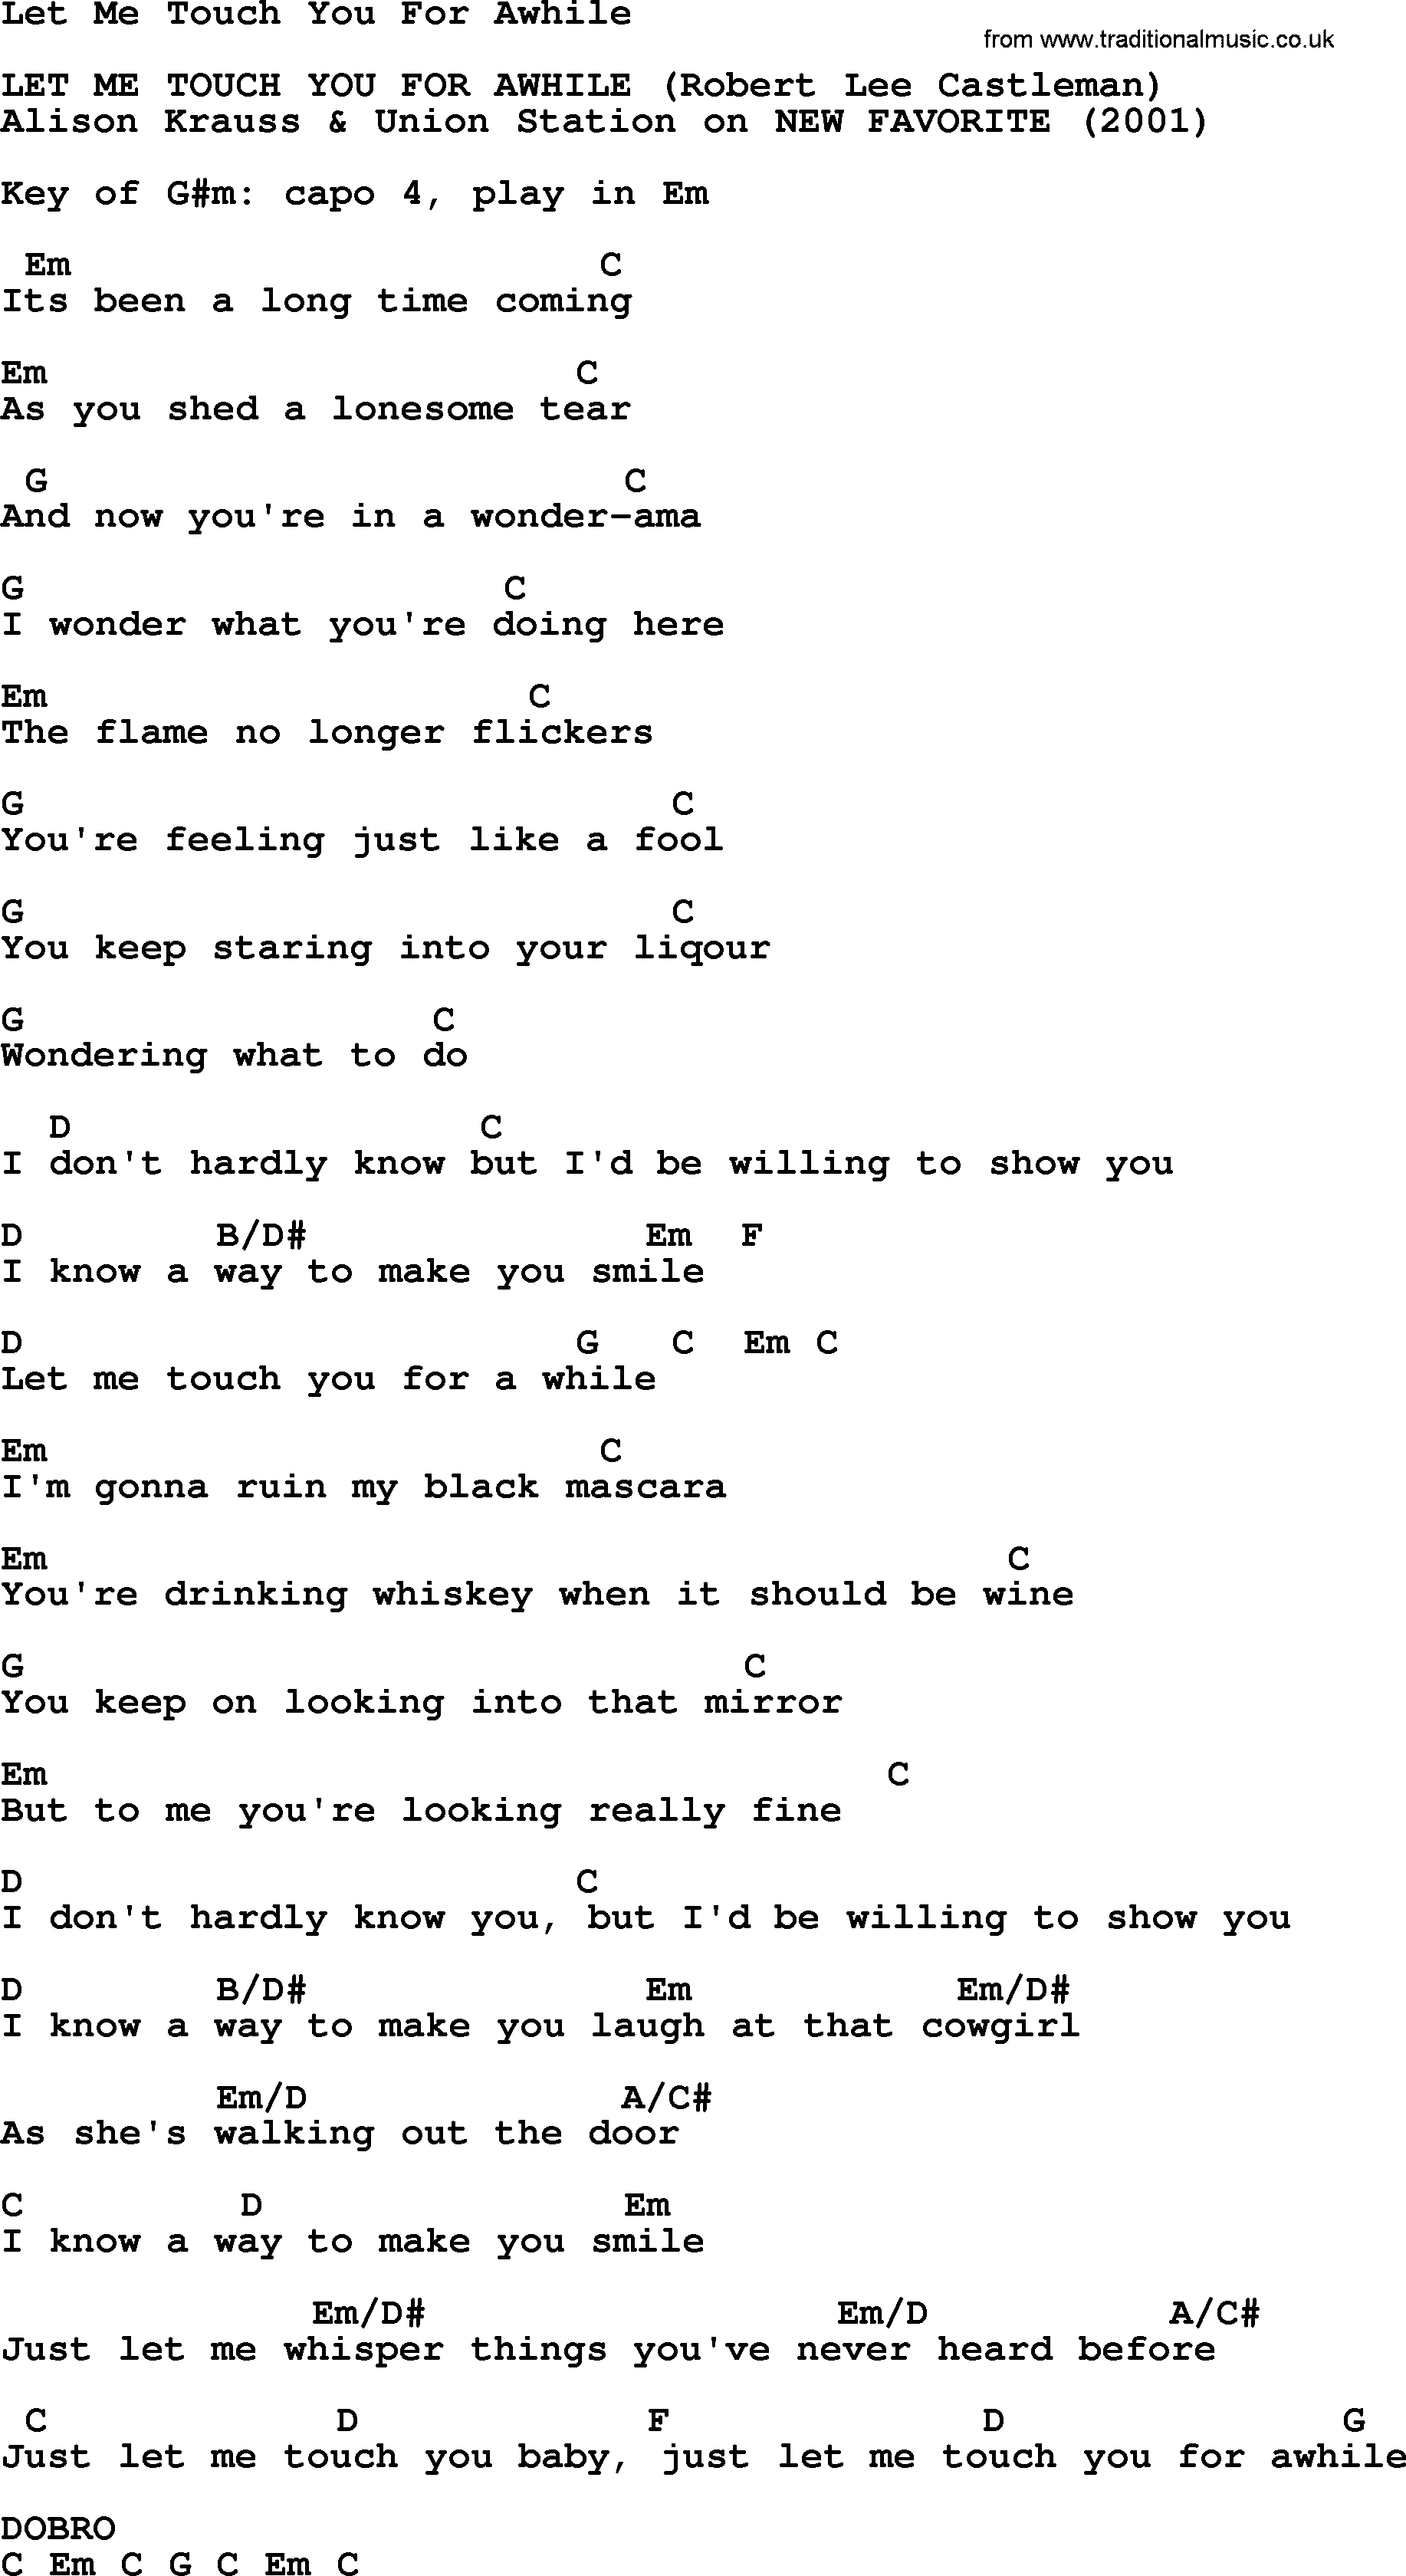 When will i touch you again lyrics